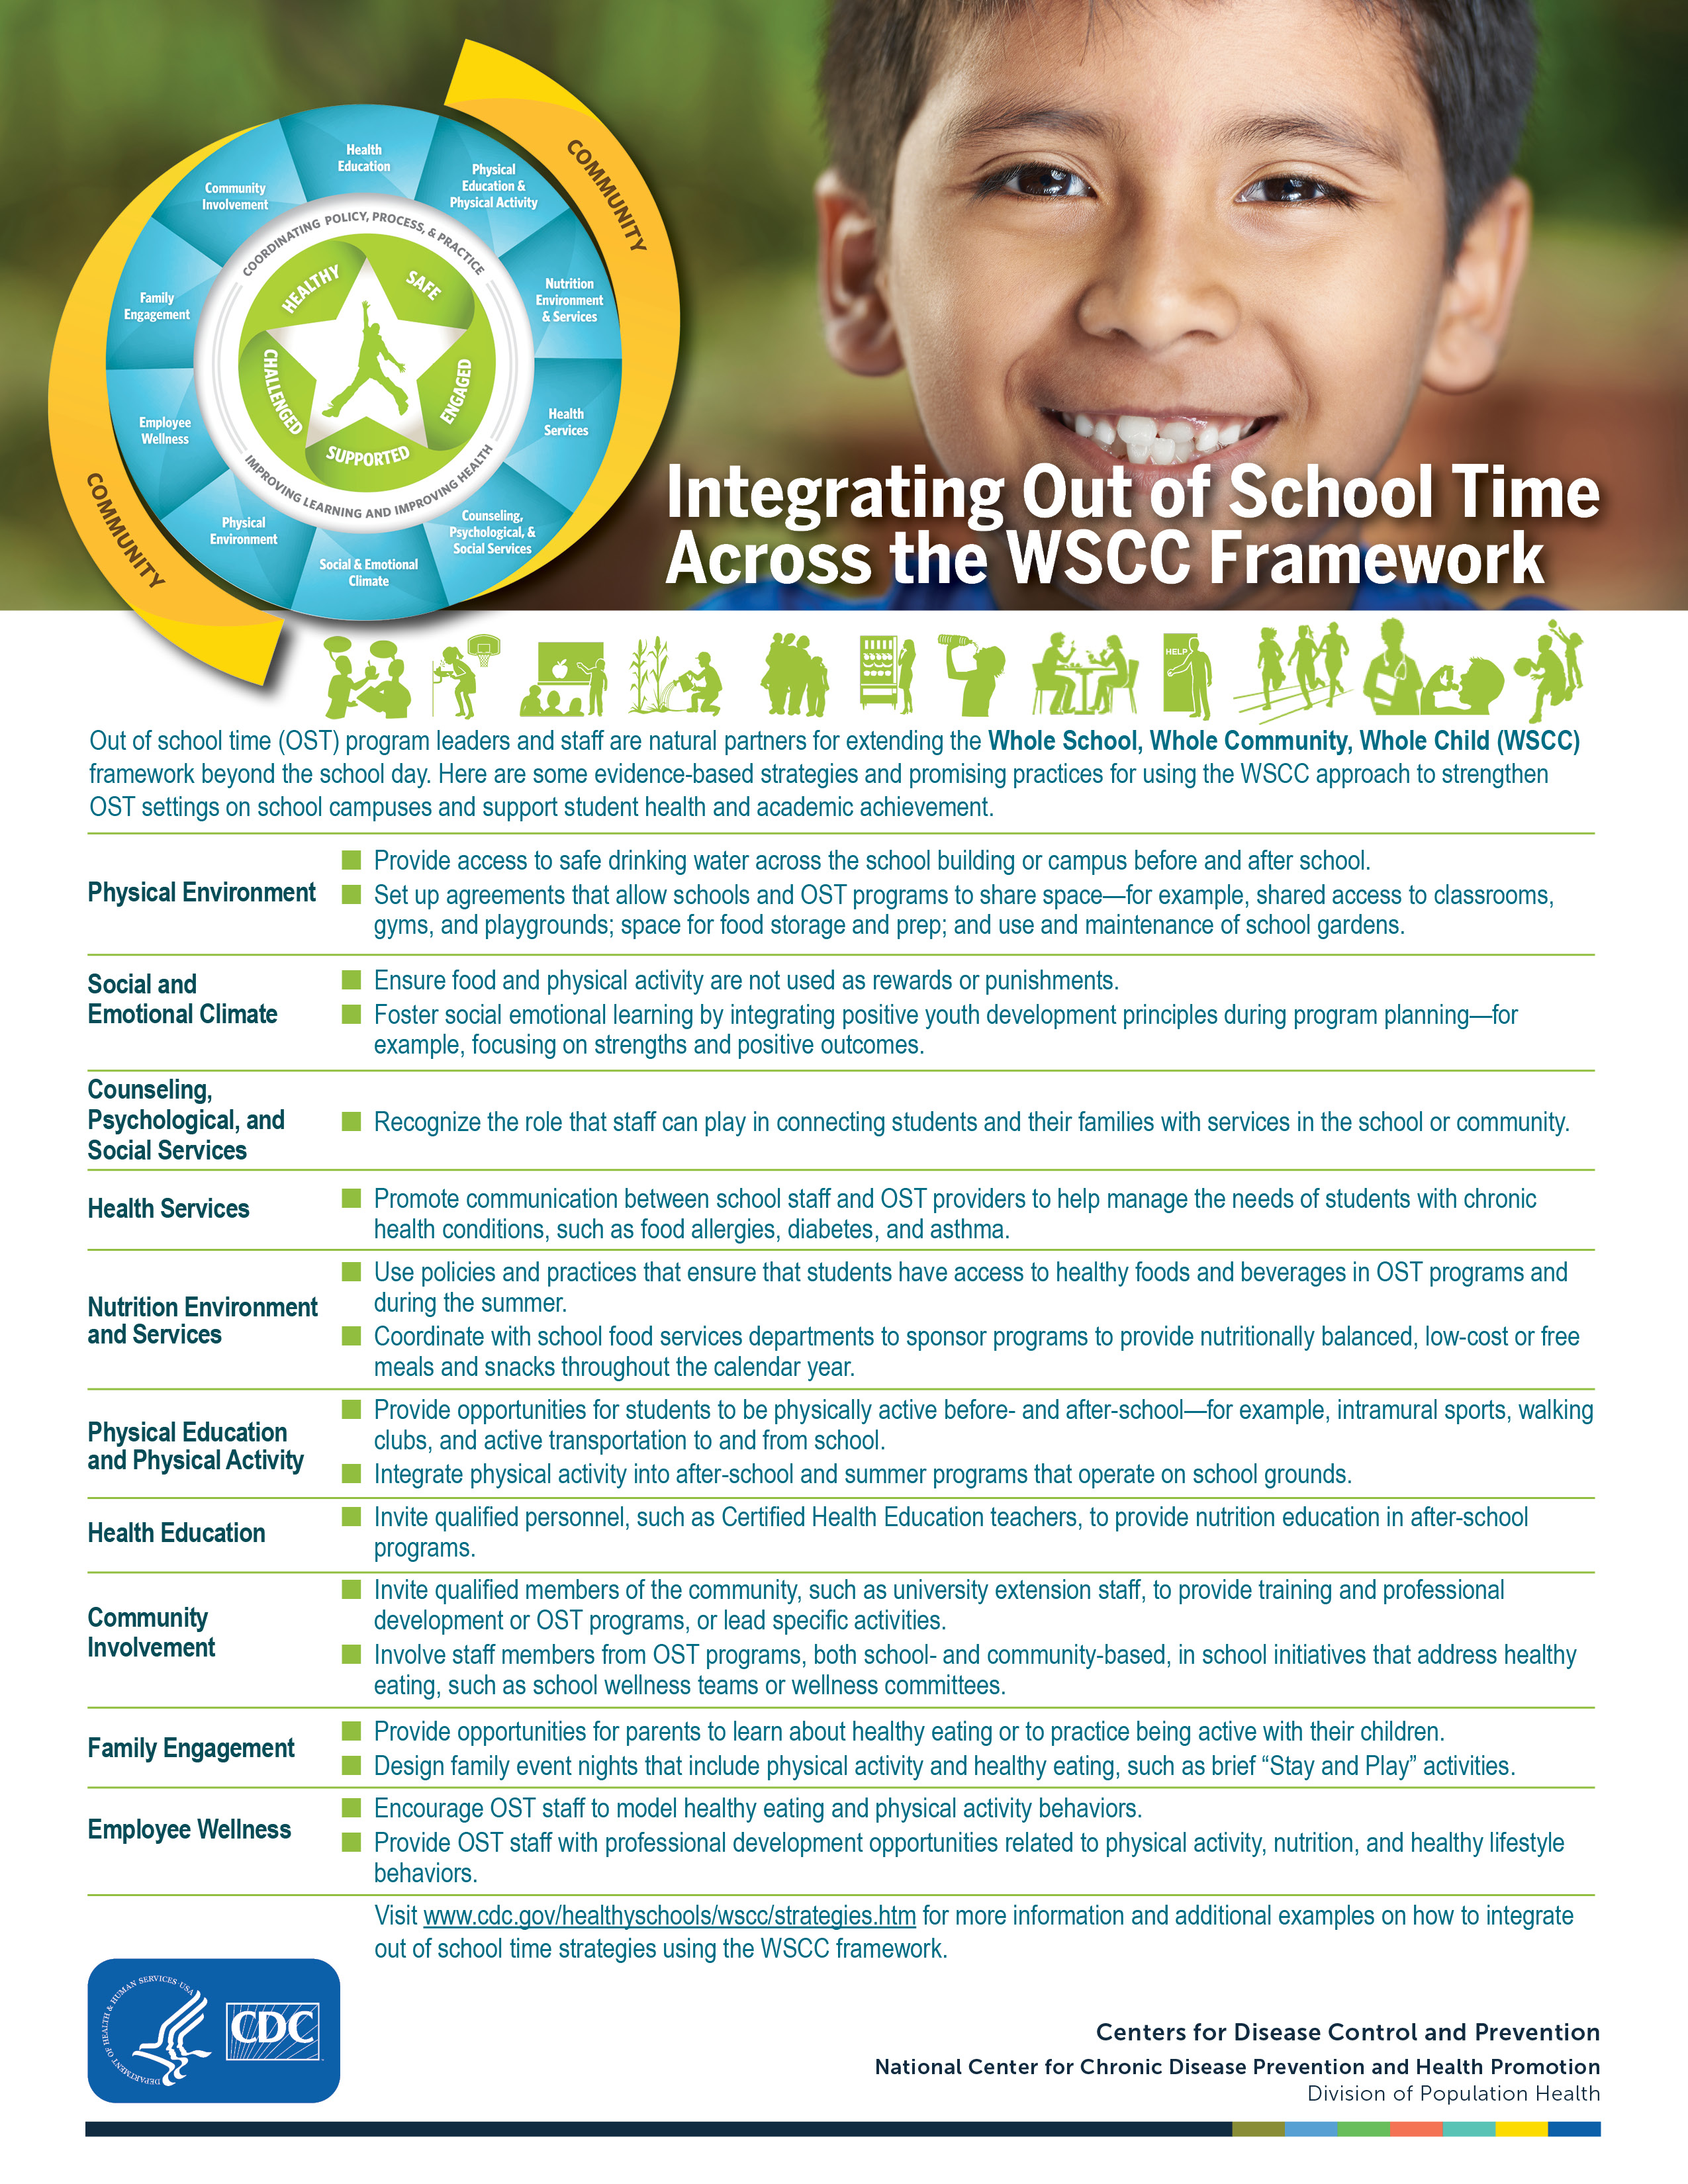 Integrating Out of School Time Across the WSCC Framework